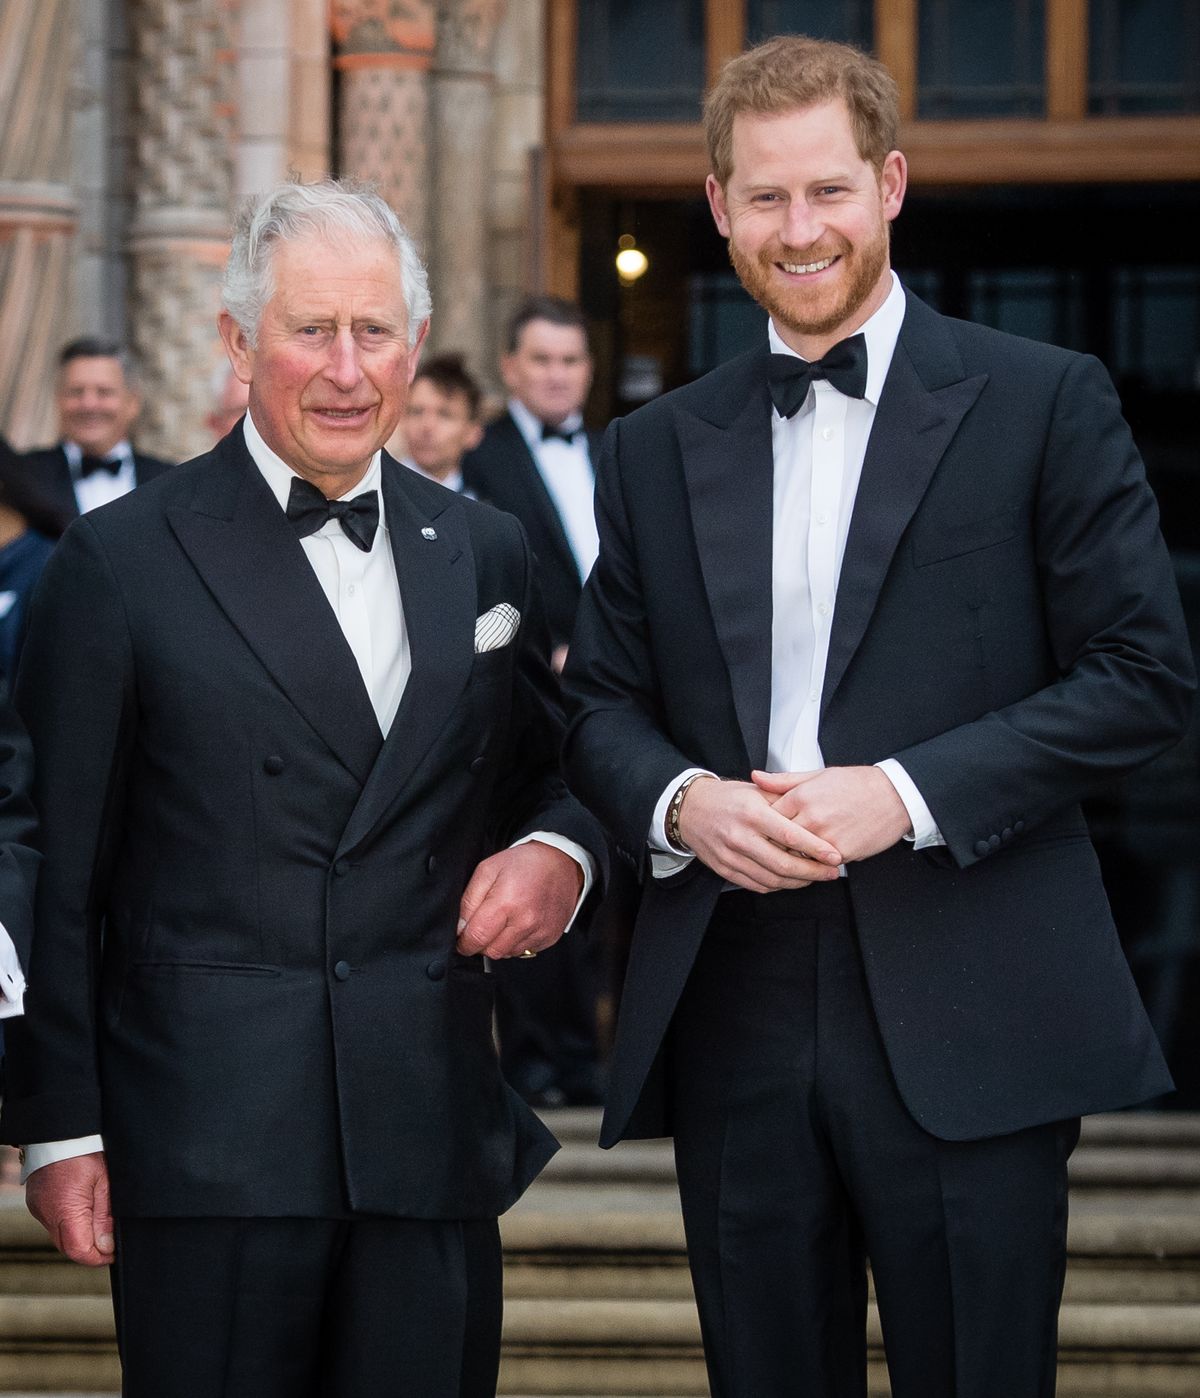 Prince Harry and his father King Charles. Credit: Getty